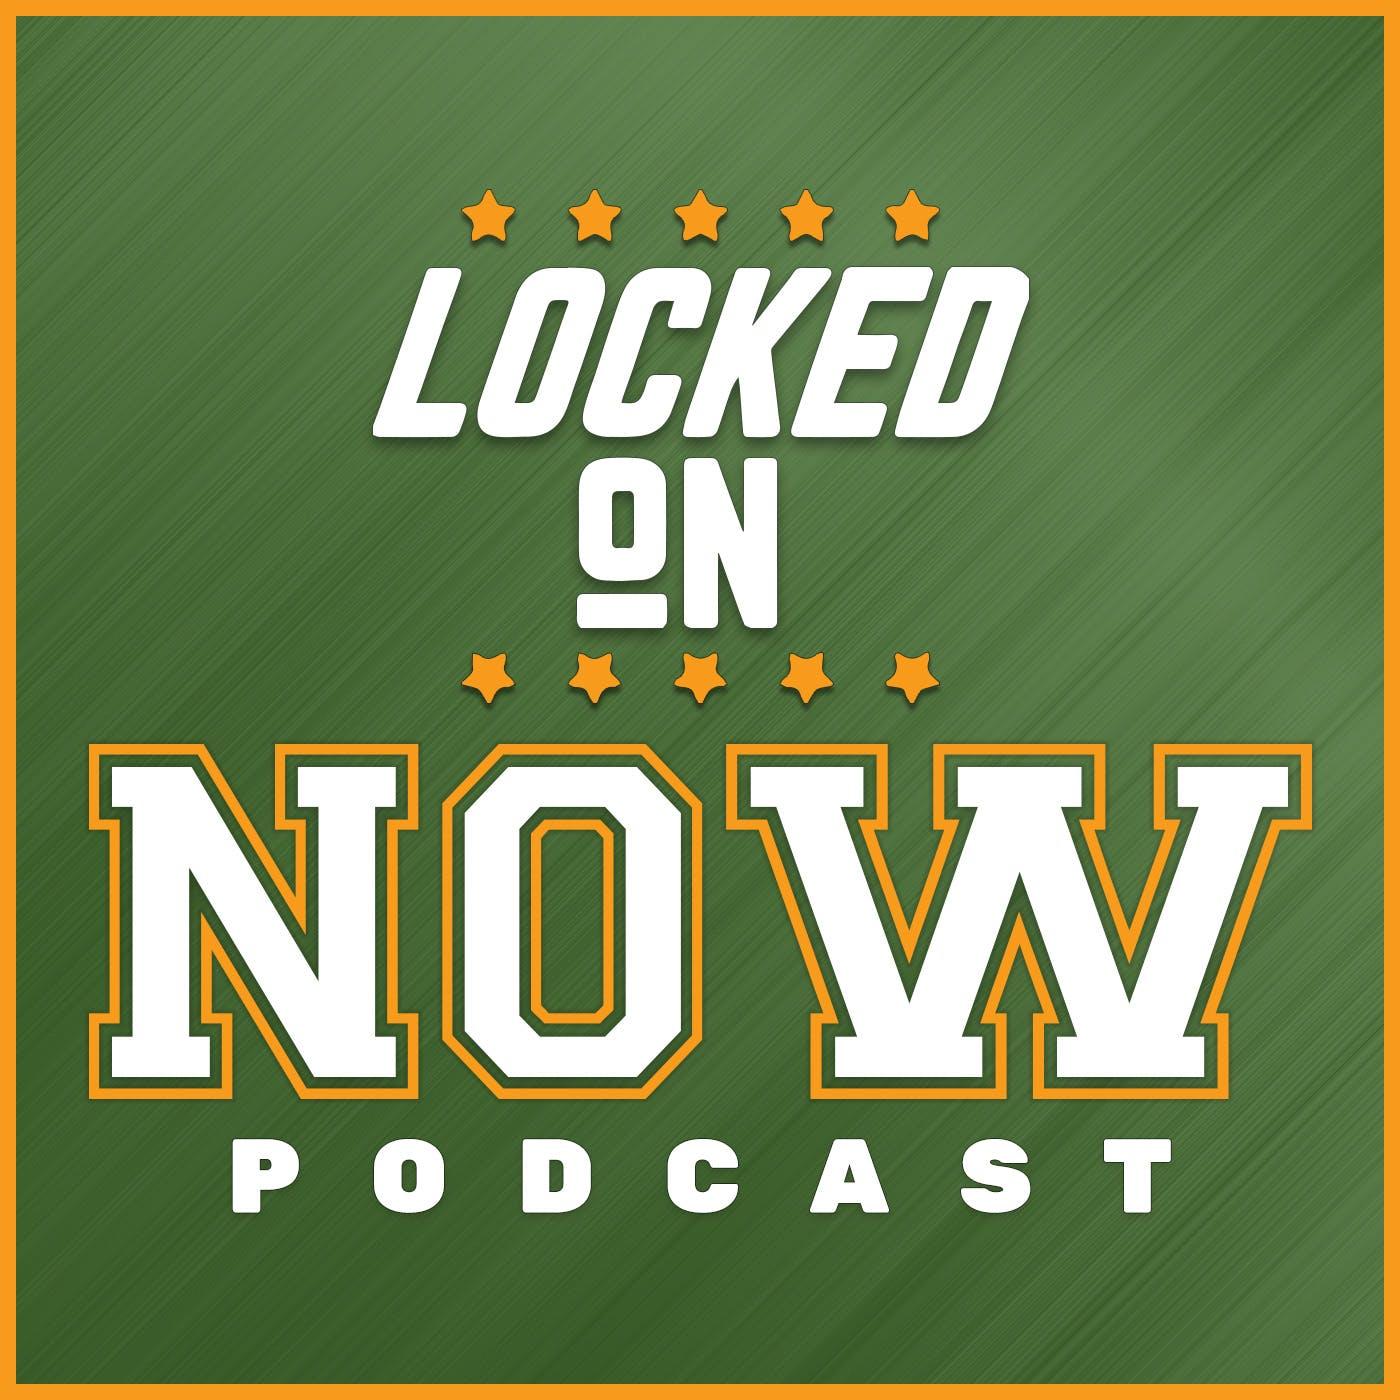 Show poster of Locked On Now - Rapid Fire Recap of all the games played across the NFL, NBA, MLB, and NHL